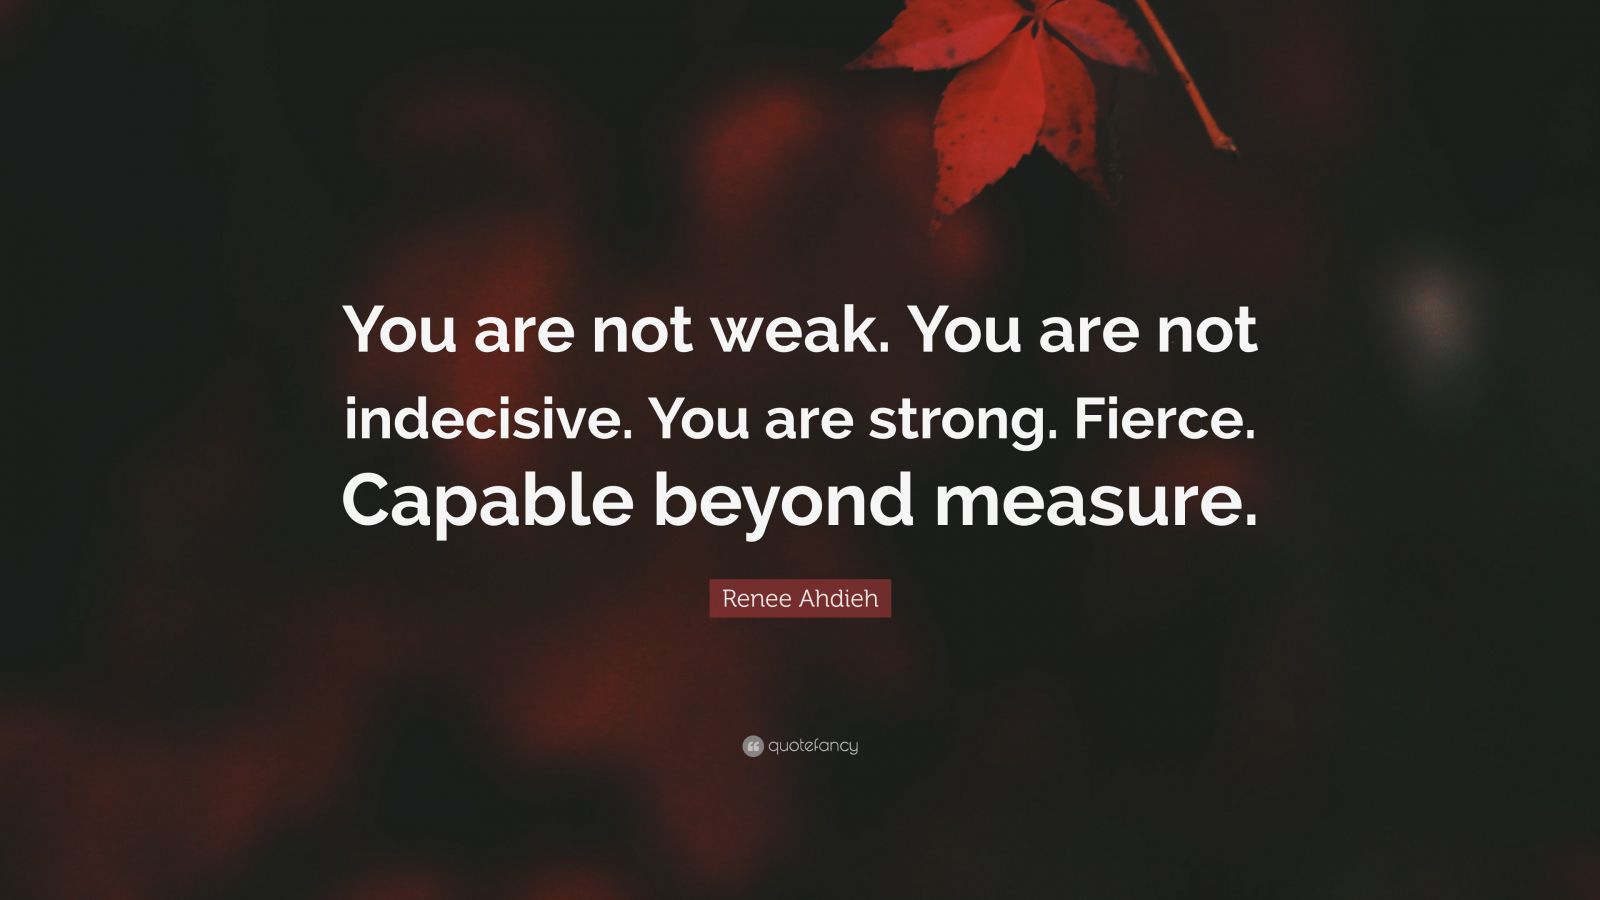 Renee Ahdieh Quote: “You are not weak. You are not indecisive. You are ...